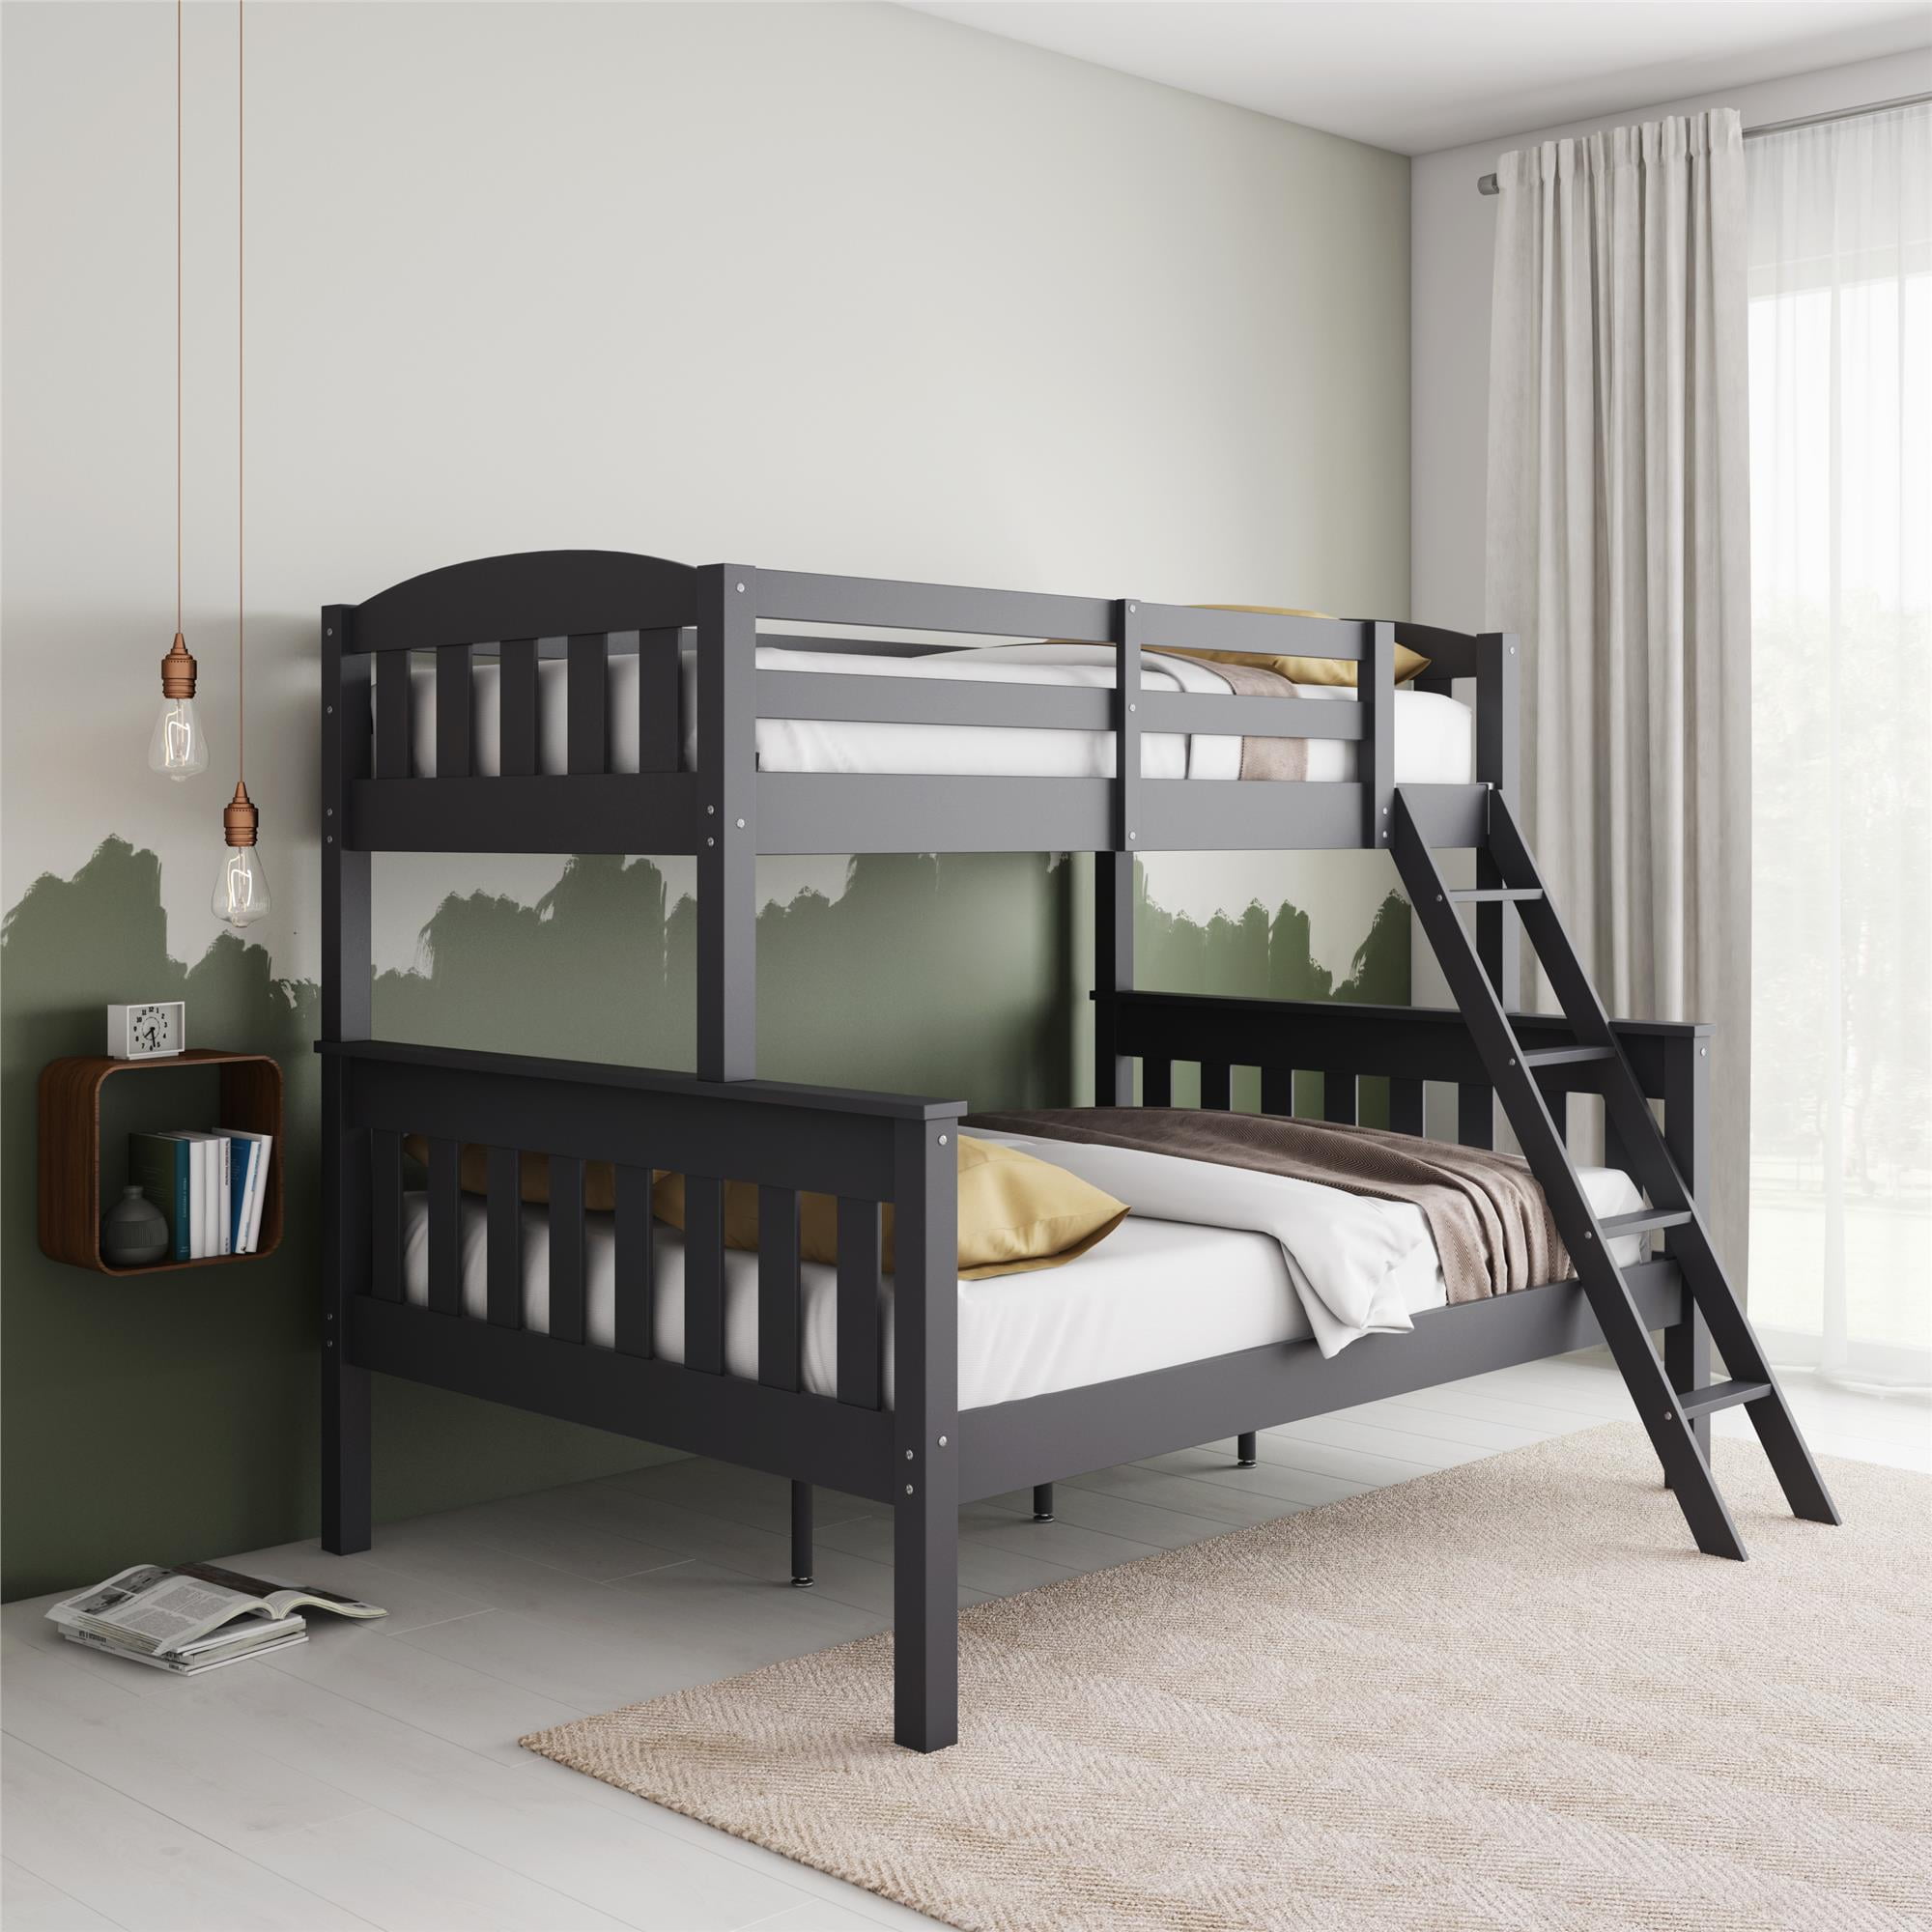 Full Bunk Bed Slate Gray, Gray Twin Over Full Bunk Bed